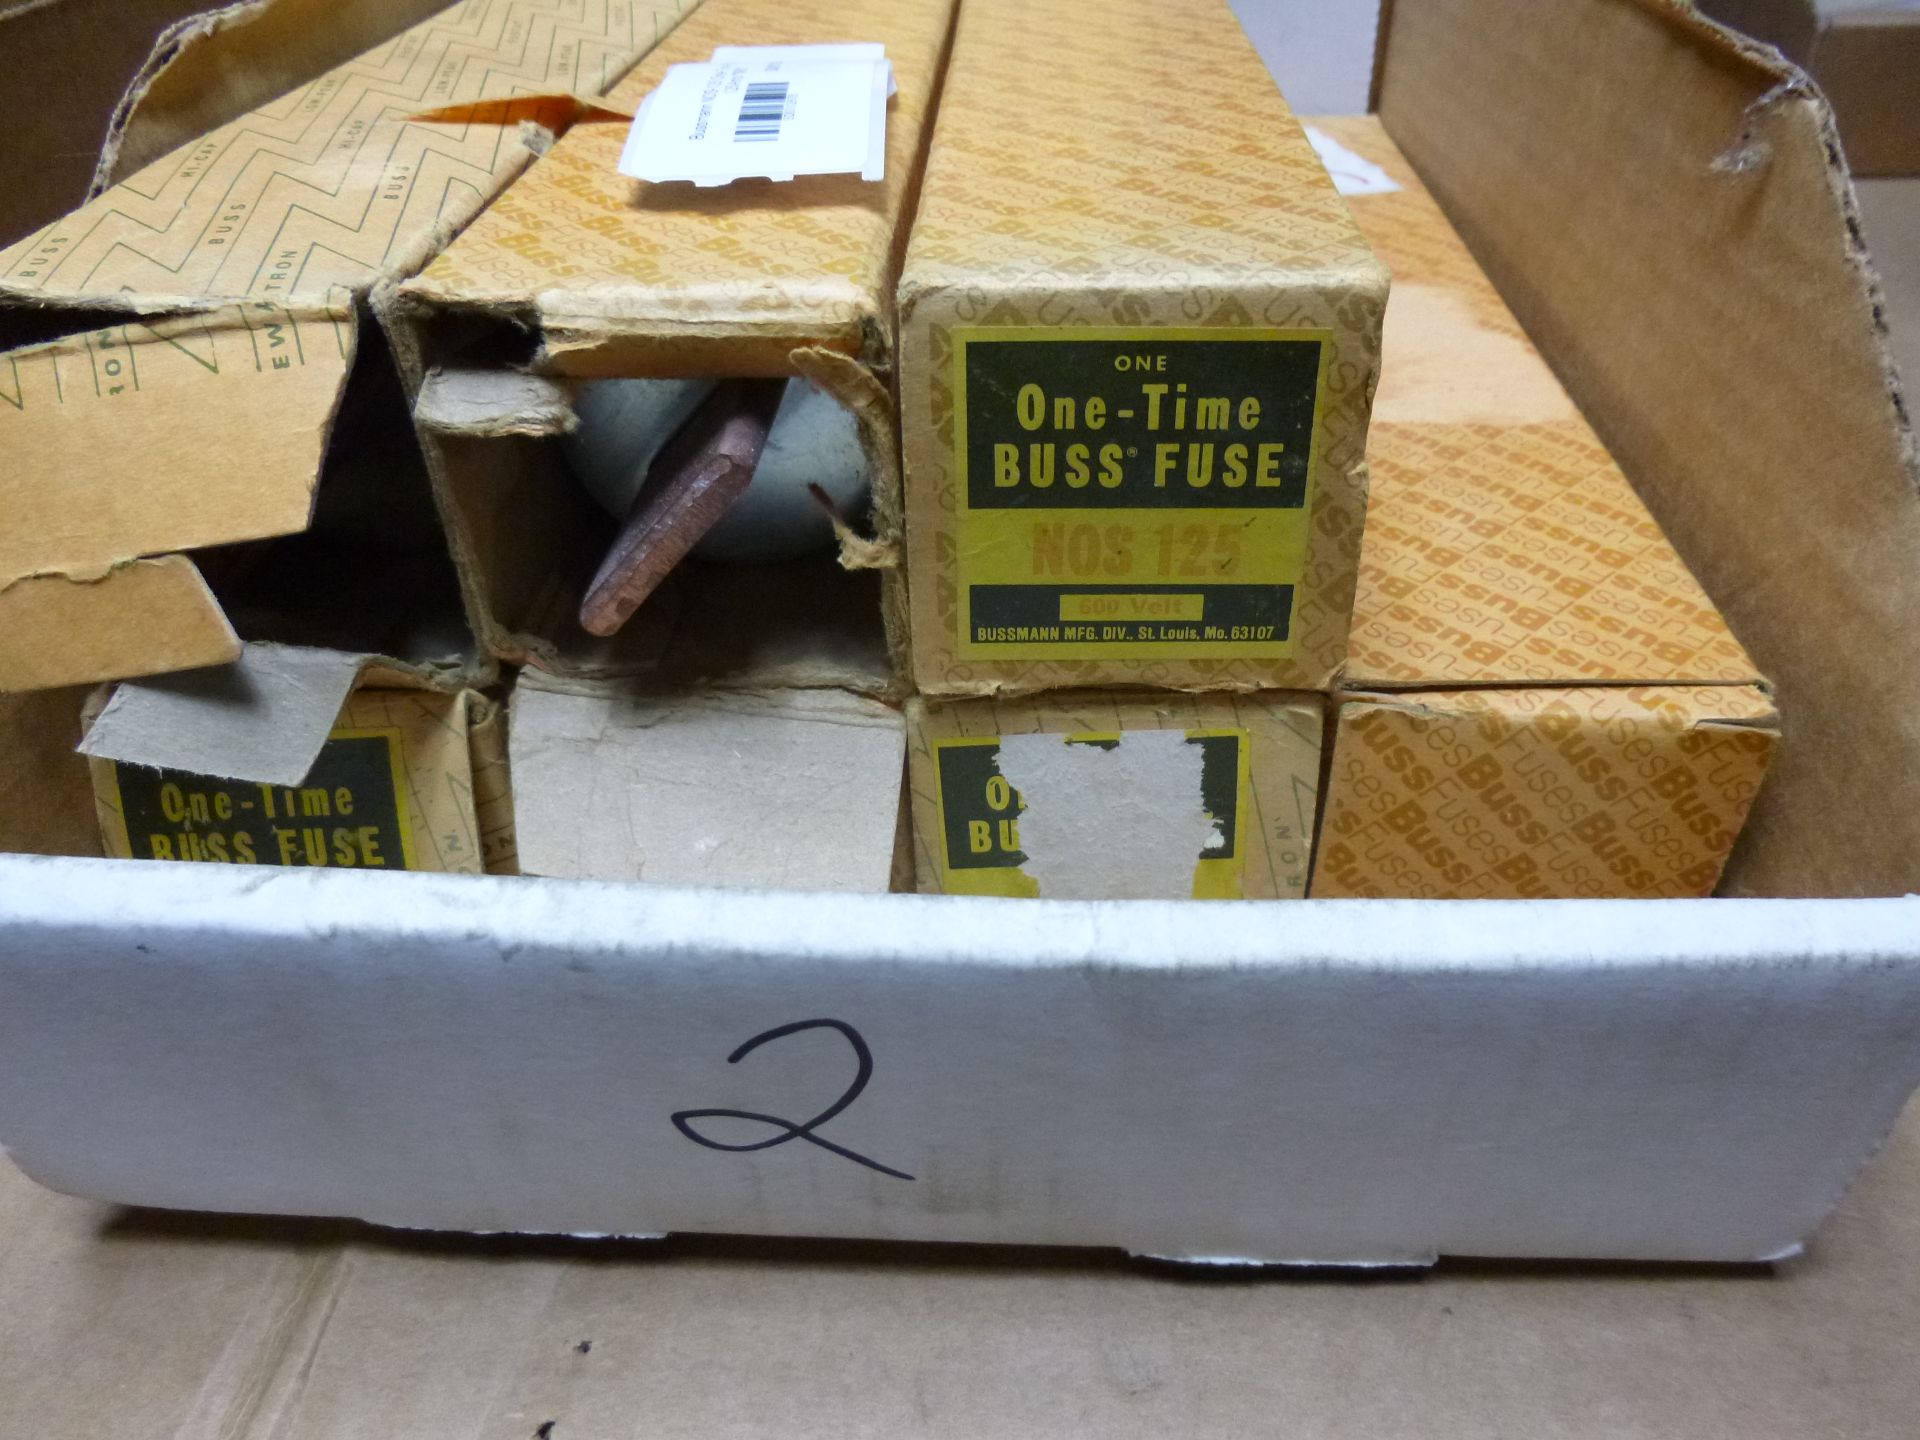 (Qty 7) Bussman One-Time Buss Fuse NOS 125 600volt (new in boxes) Shipping can be prepared for eithe - Image 2 of 2